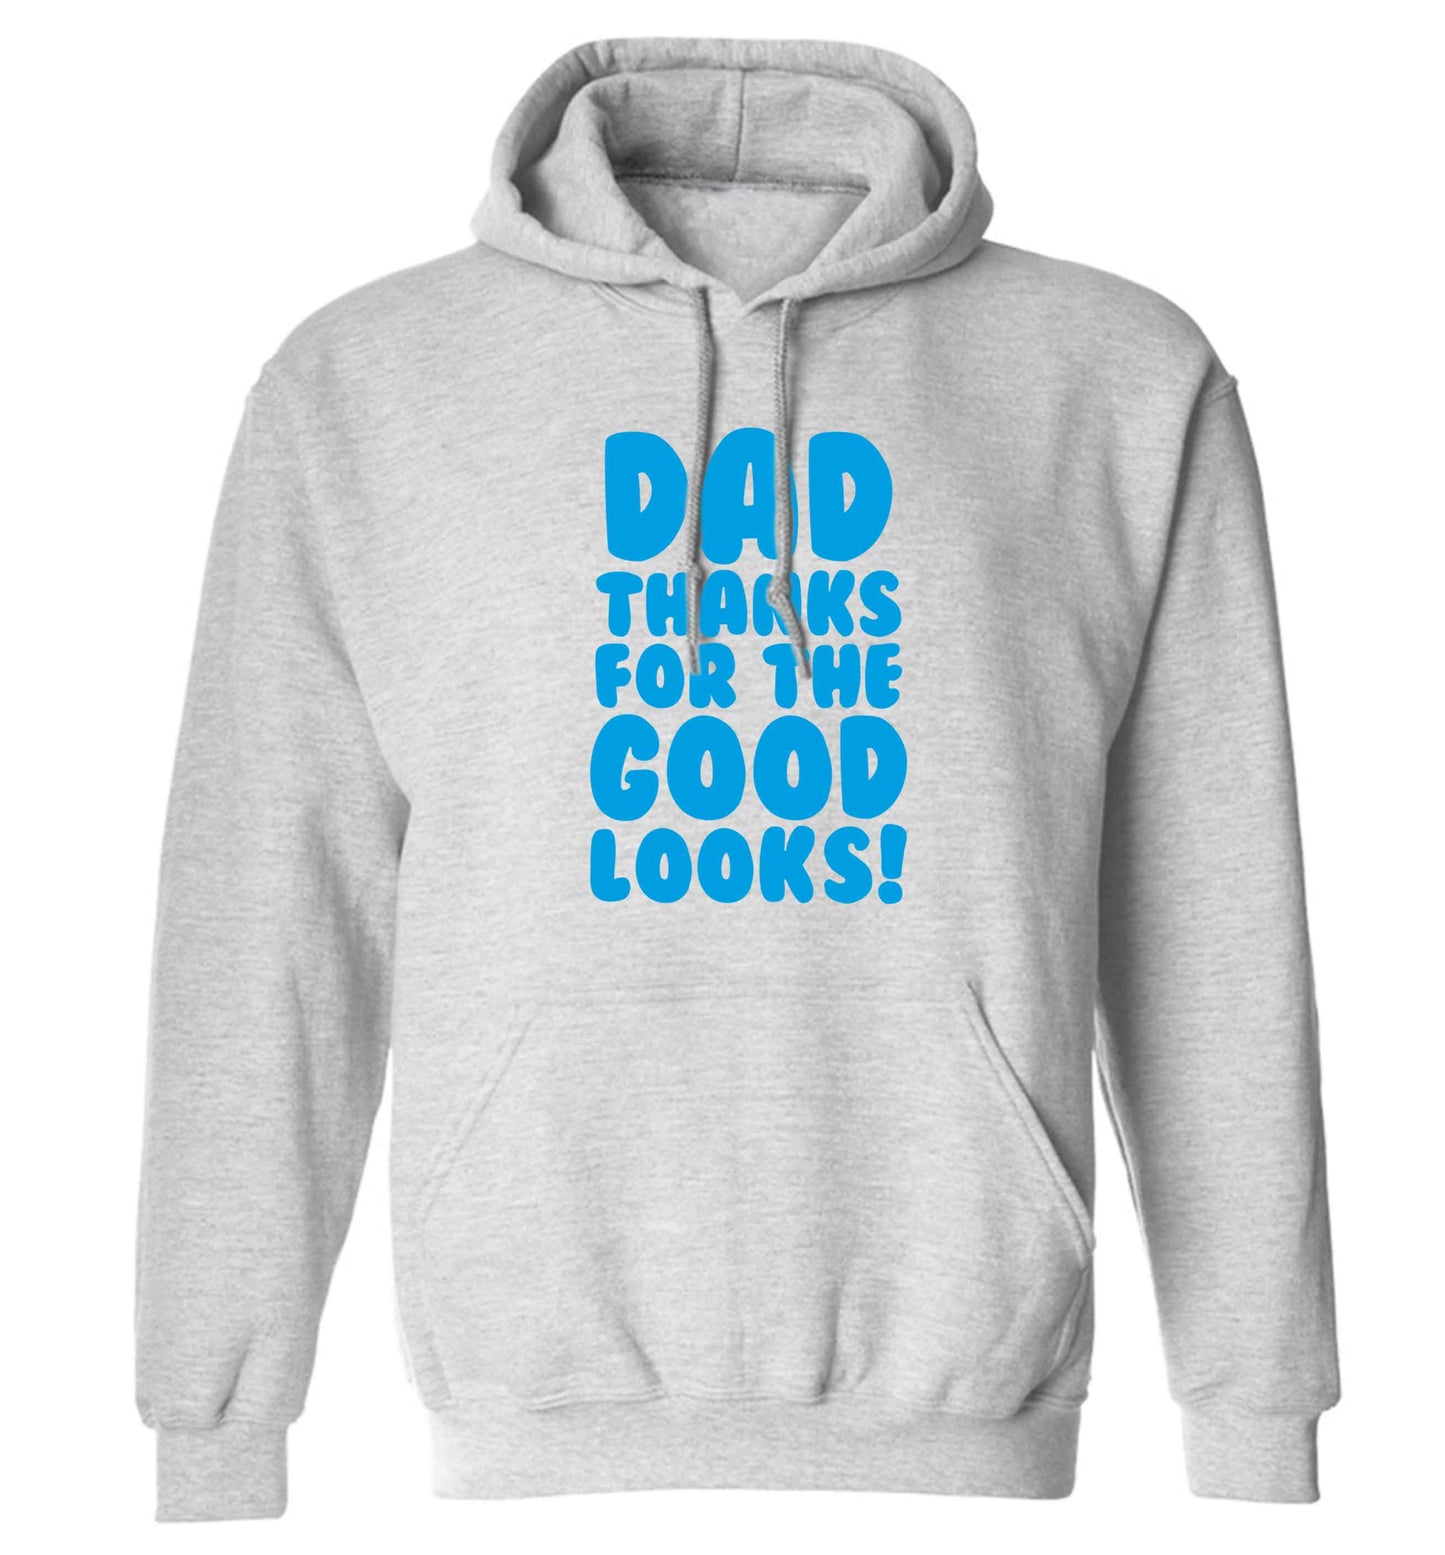 Dad thanks for the good looks adults unisex grey hoodie 2XL